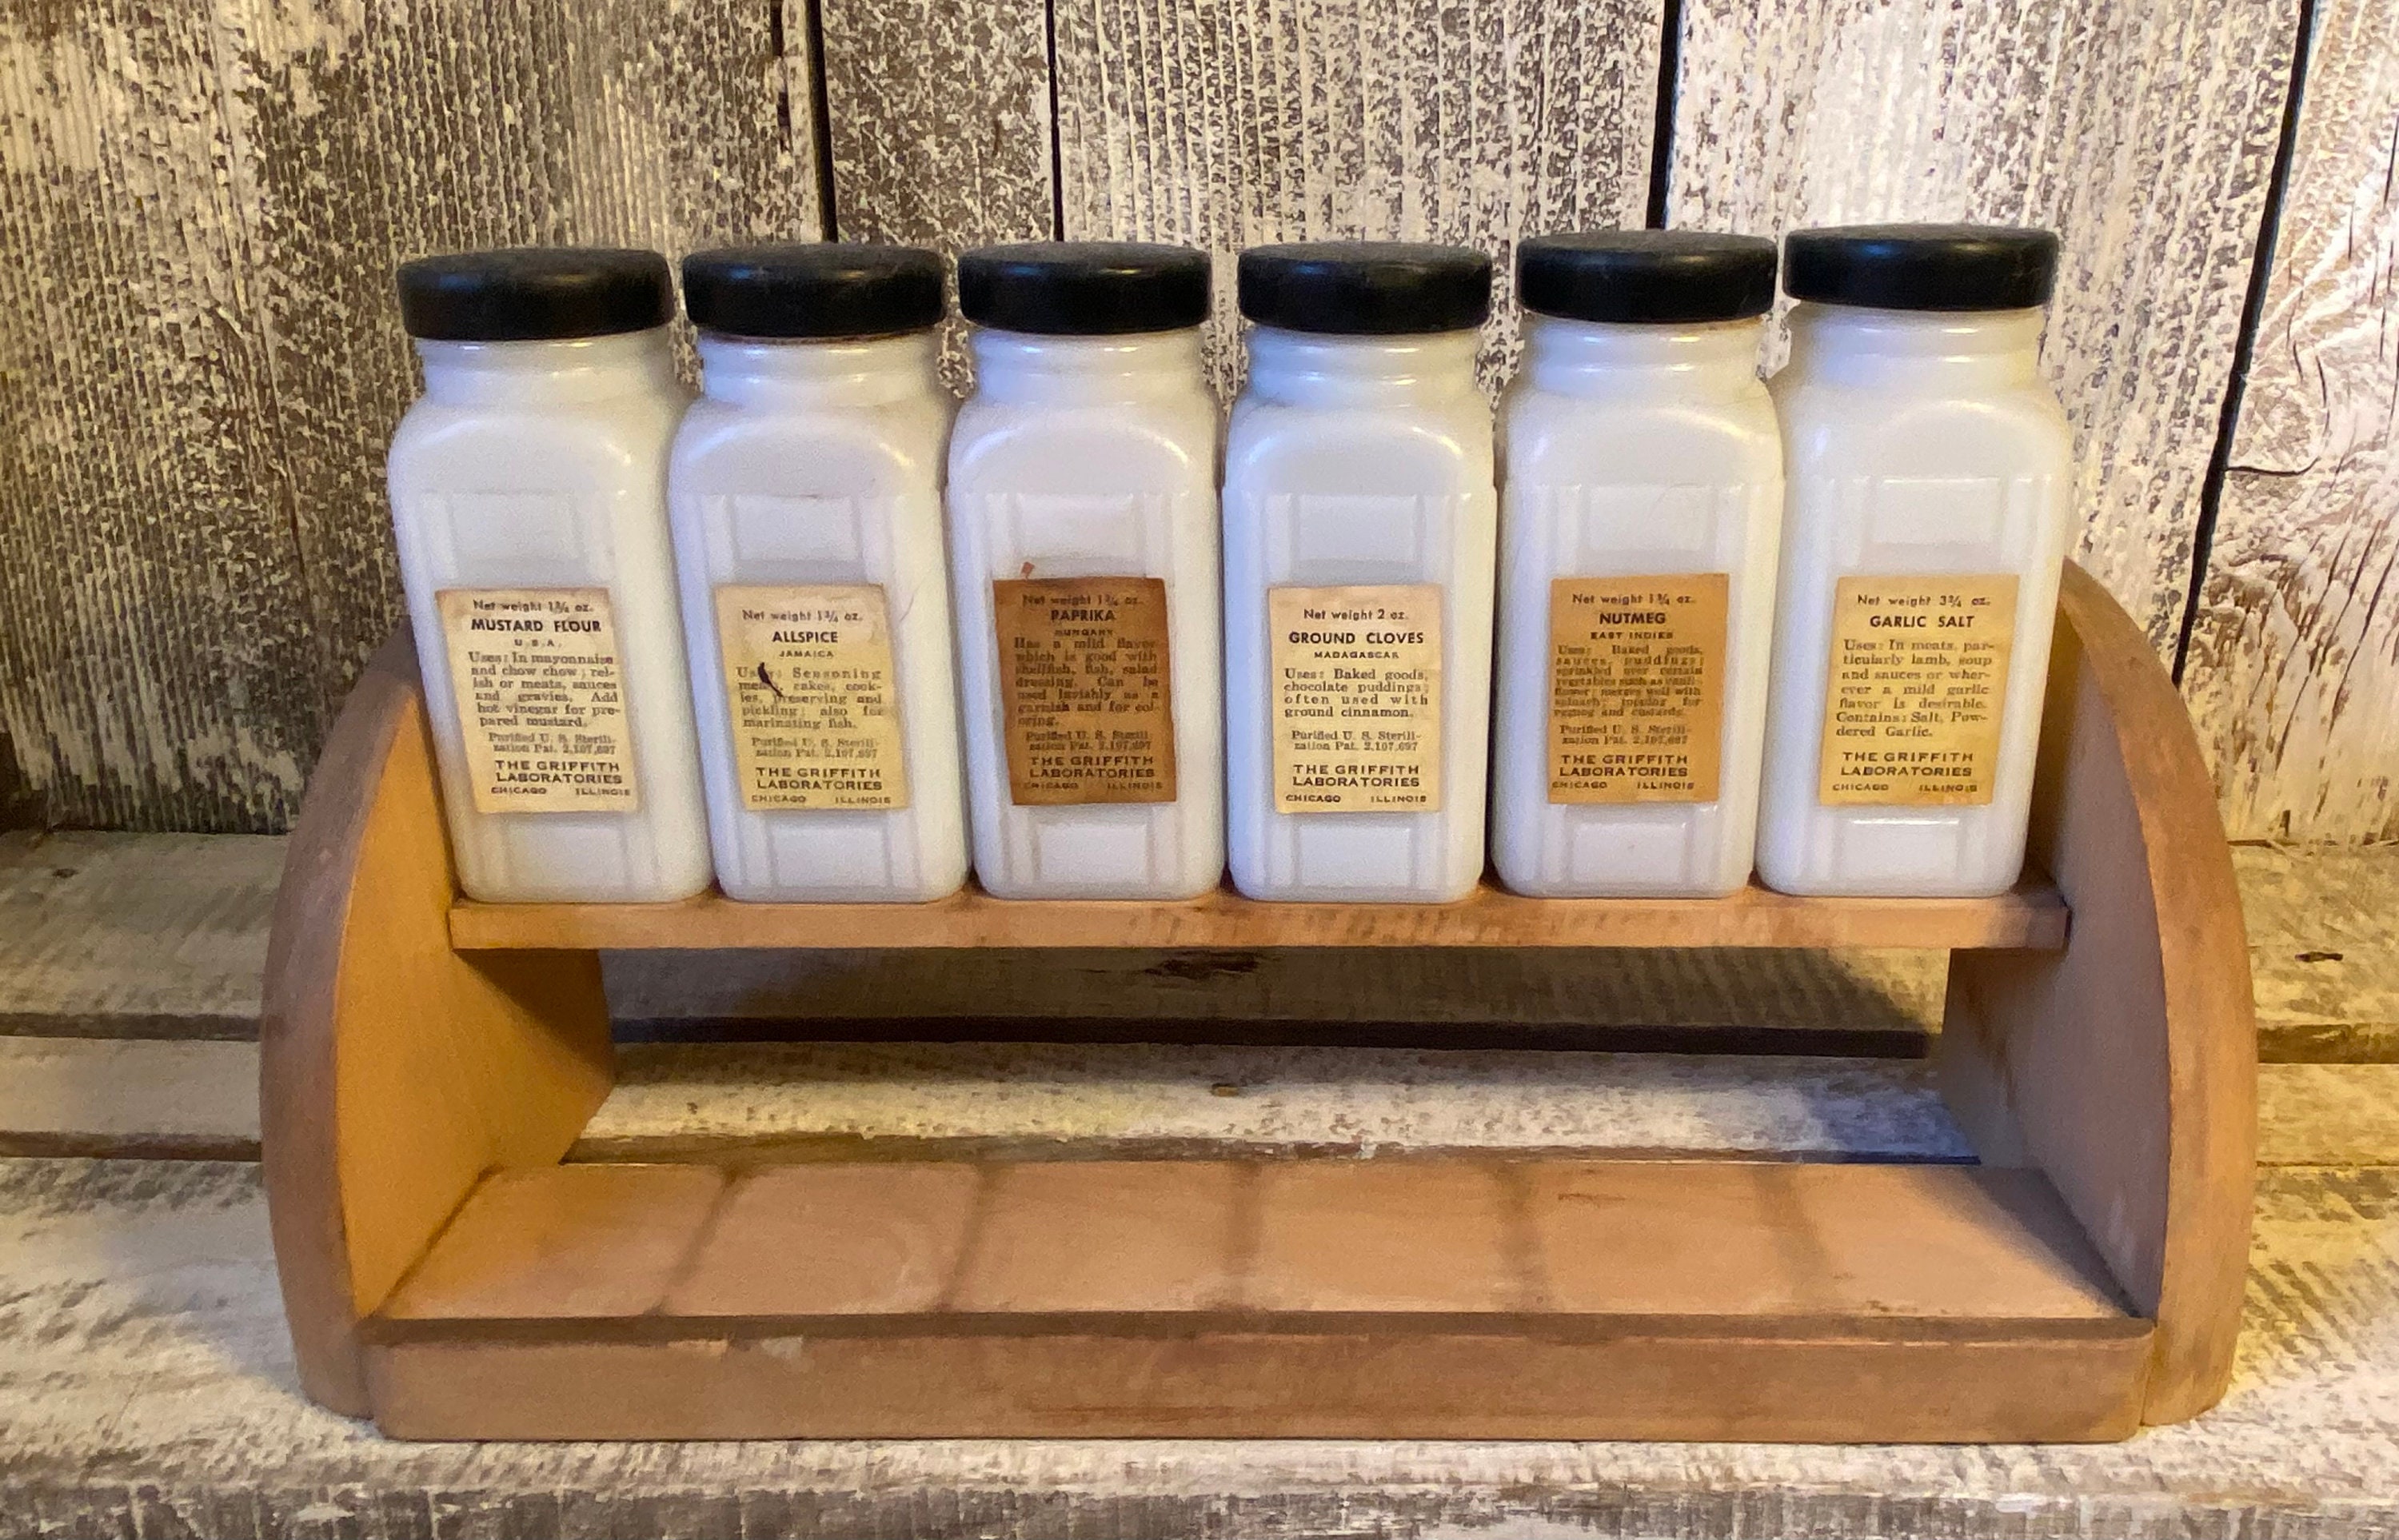 VINTAGE GRIFFITH SET OF 12 MILK GLASS SPICE JARS With Wooden Rack